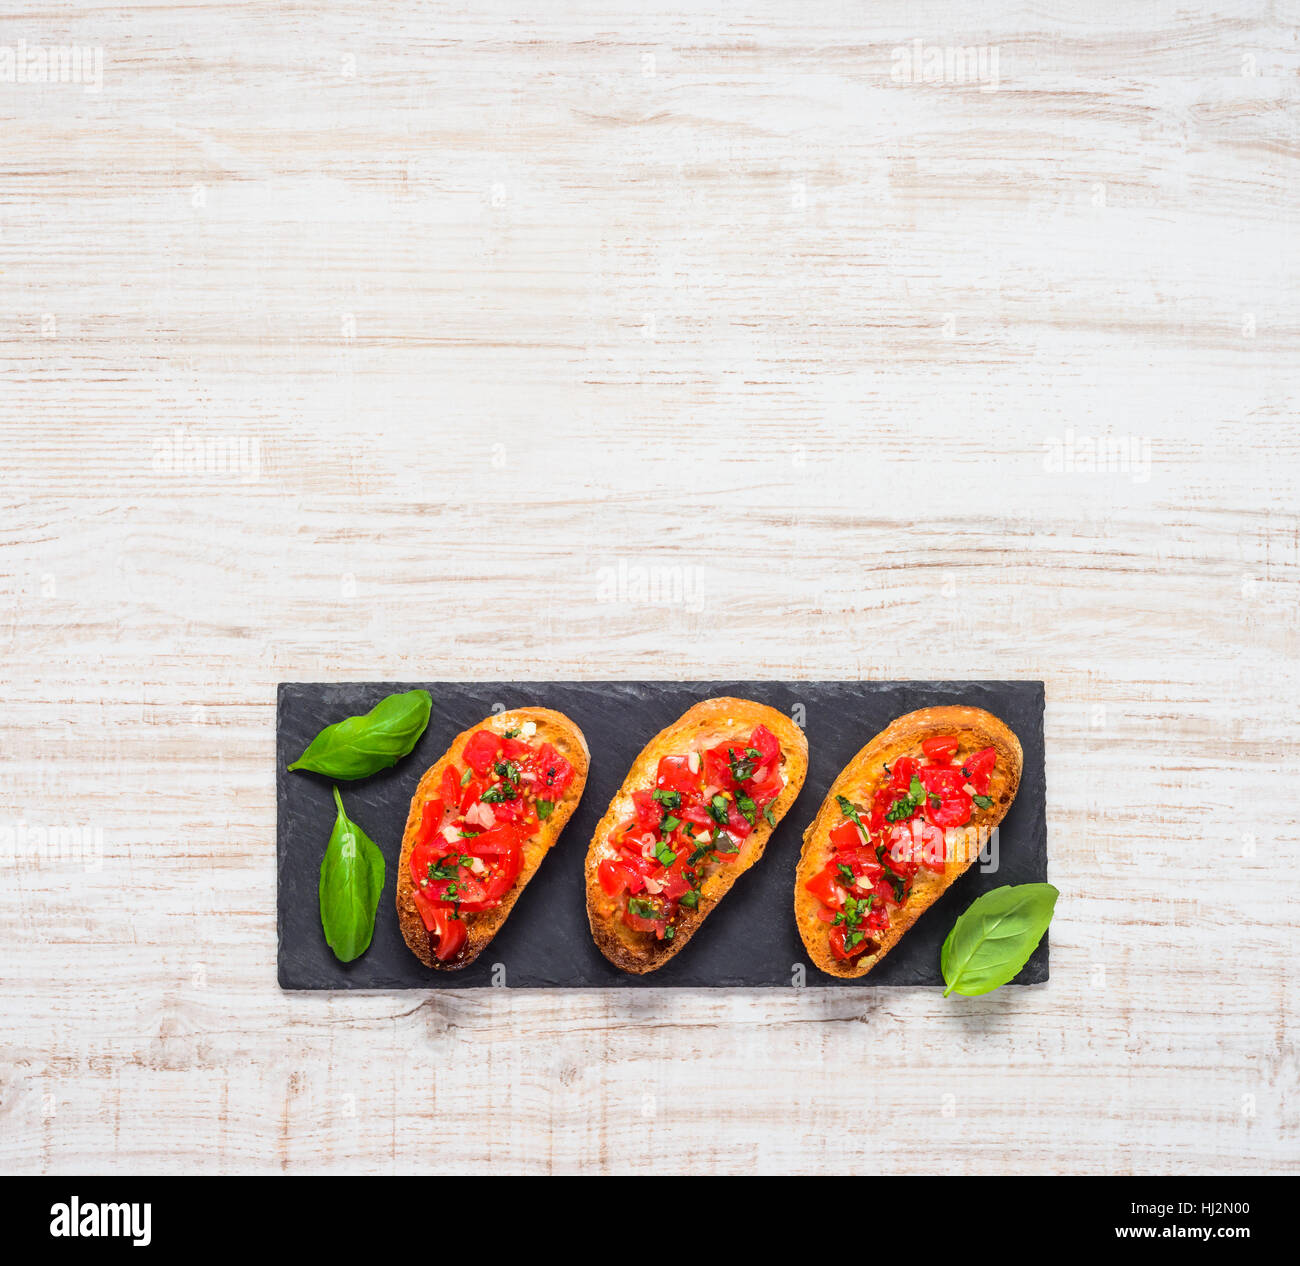 Italian Bruschetta with Tomato, Garlic and Basil in Top View Copy Space Text Area Stock Photo